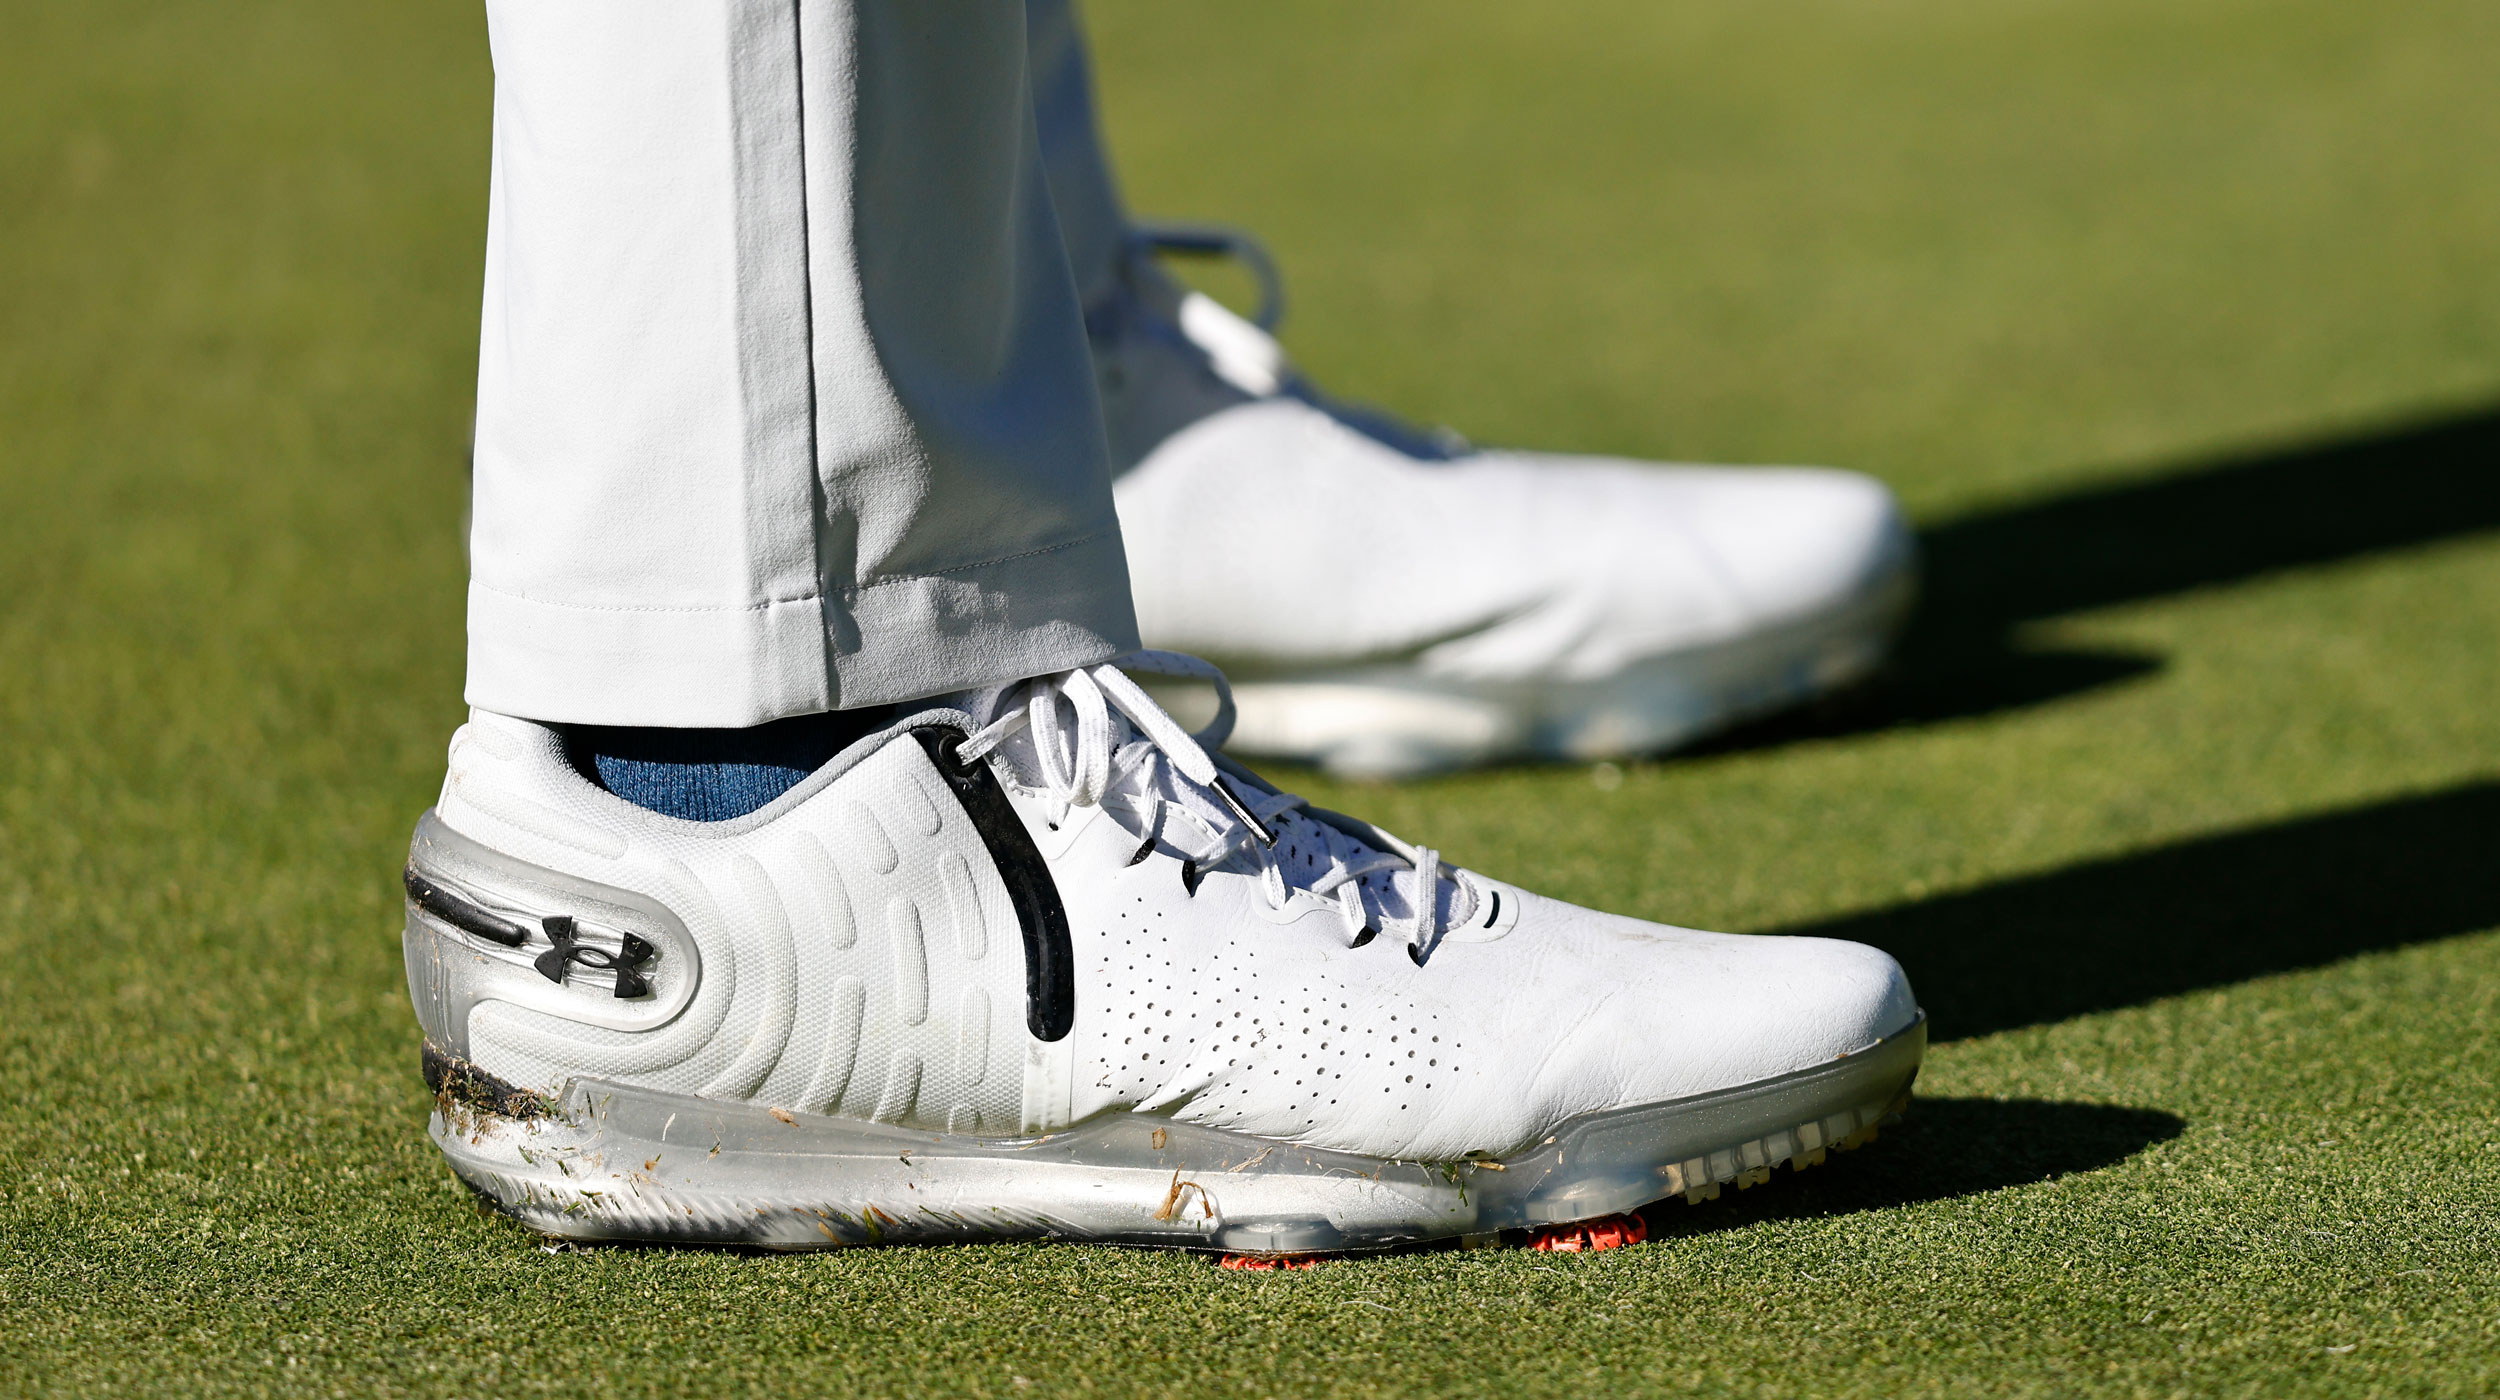 Brisa Ostentoso Fabricante What Shoes Does Jordan Spieth Wear? | Golf Monthly